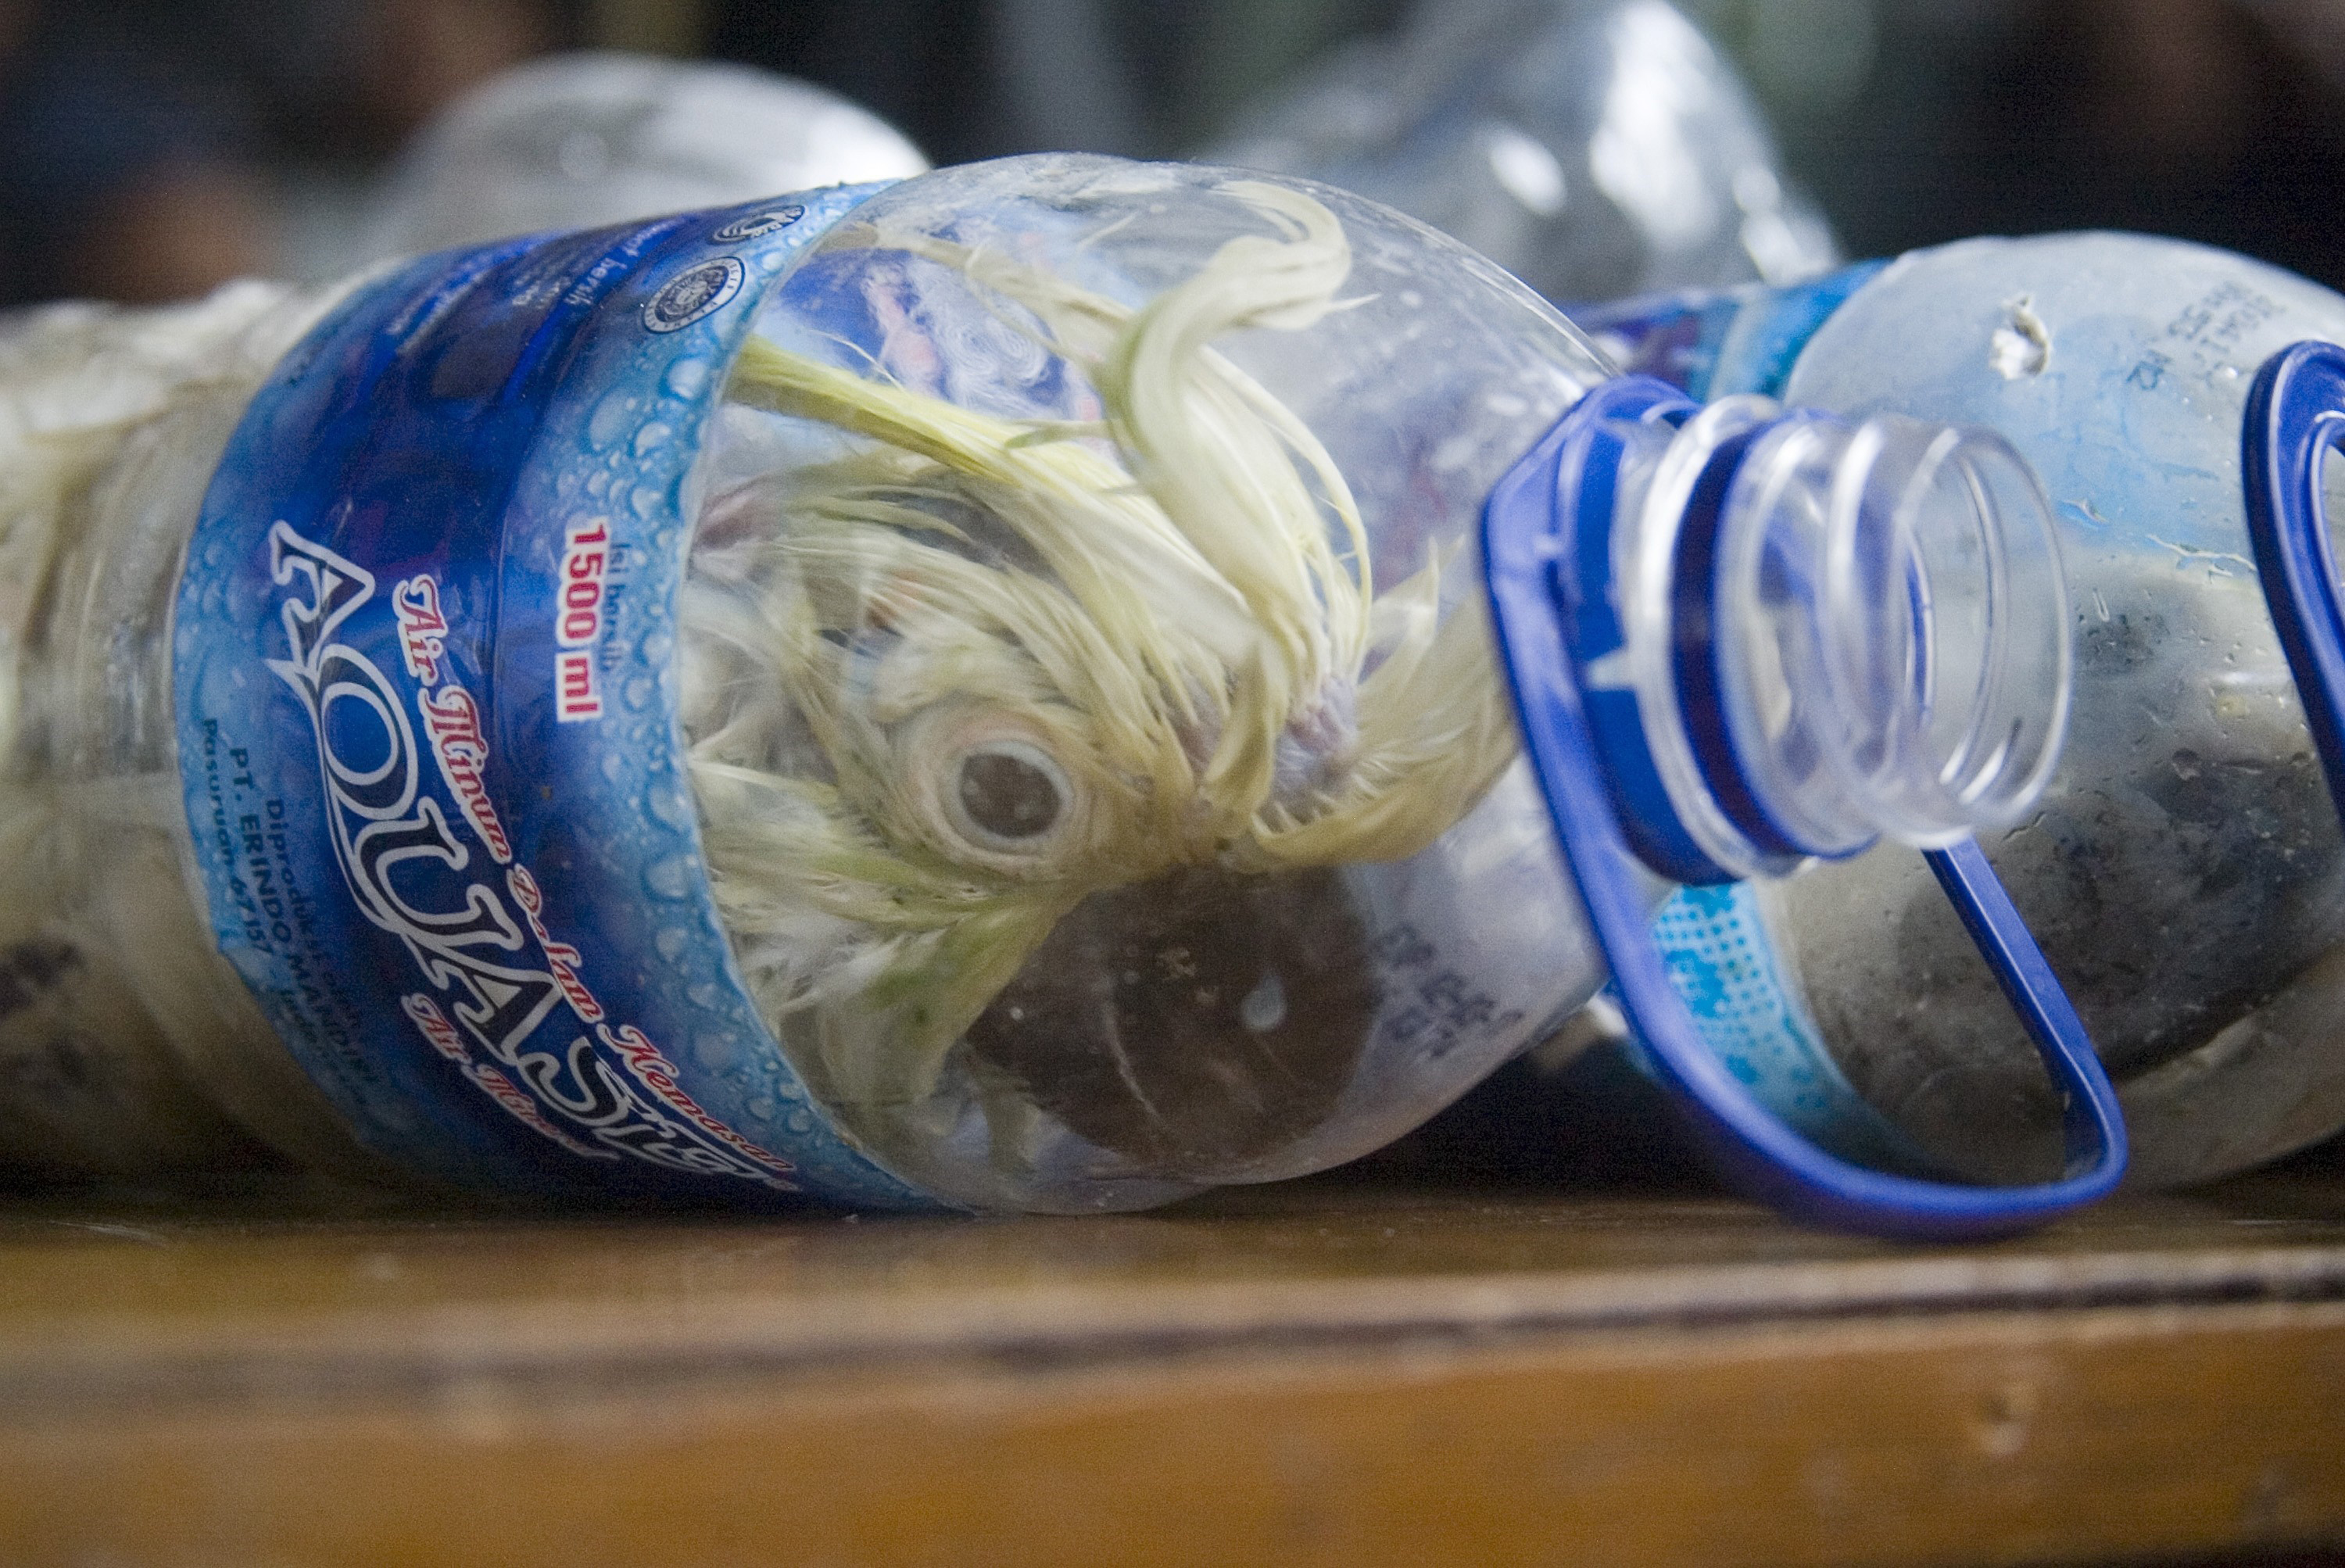 A <i>Cacatua sulphurea</i> that was successfully secured from illegal wildlife trading is seen in an empty bottle in Surabaya, Indonesia, on May 4, 2015 (Suryanto—Anadolu Agency/Getty Images)